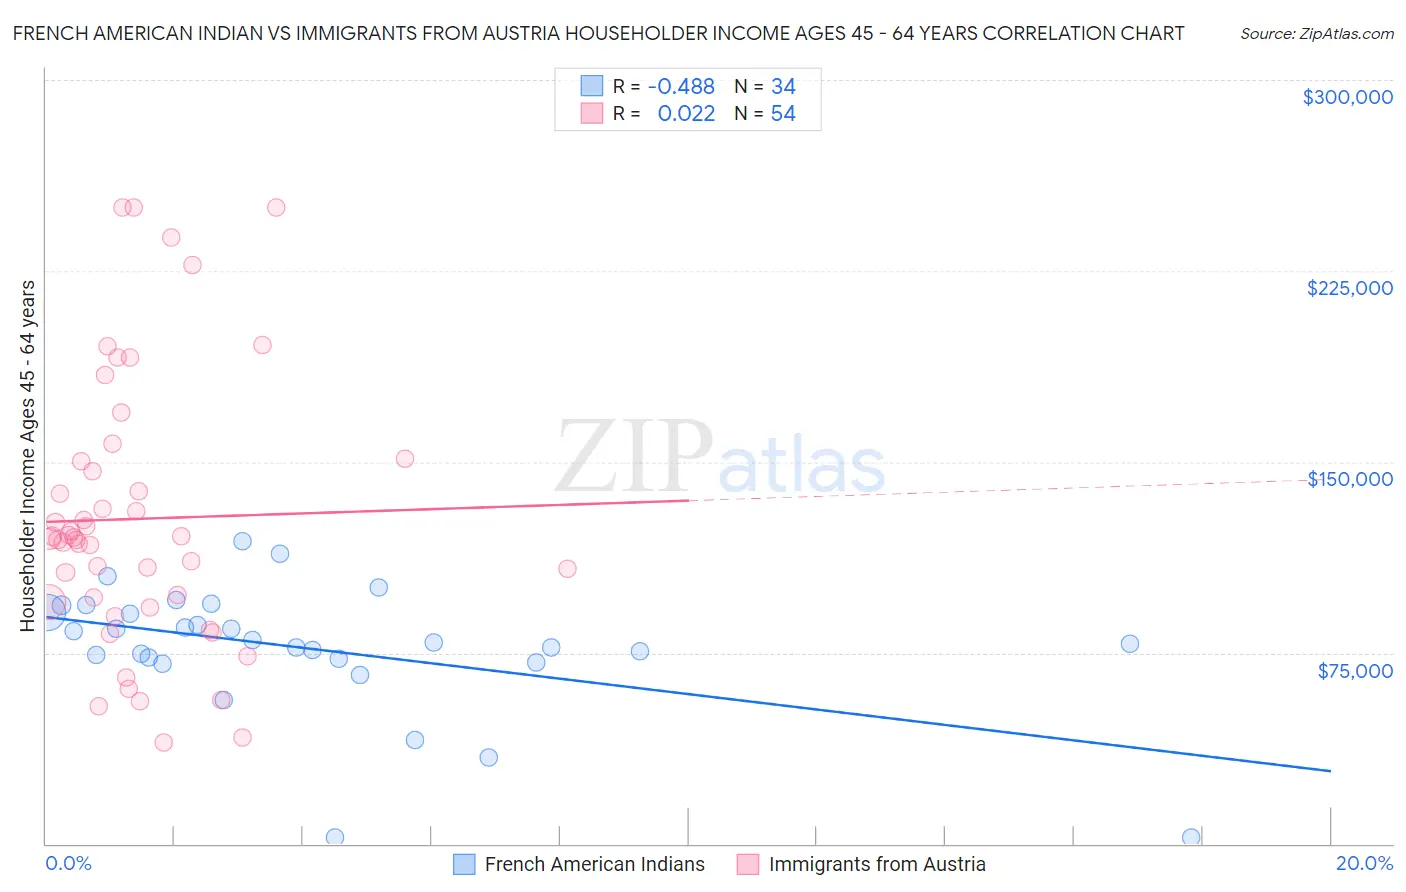 French American Indian vs Immigrants from Austria Householder Income Ages 45 - 64 years